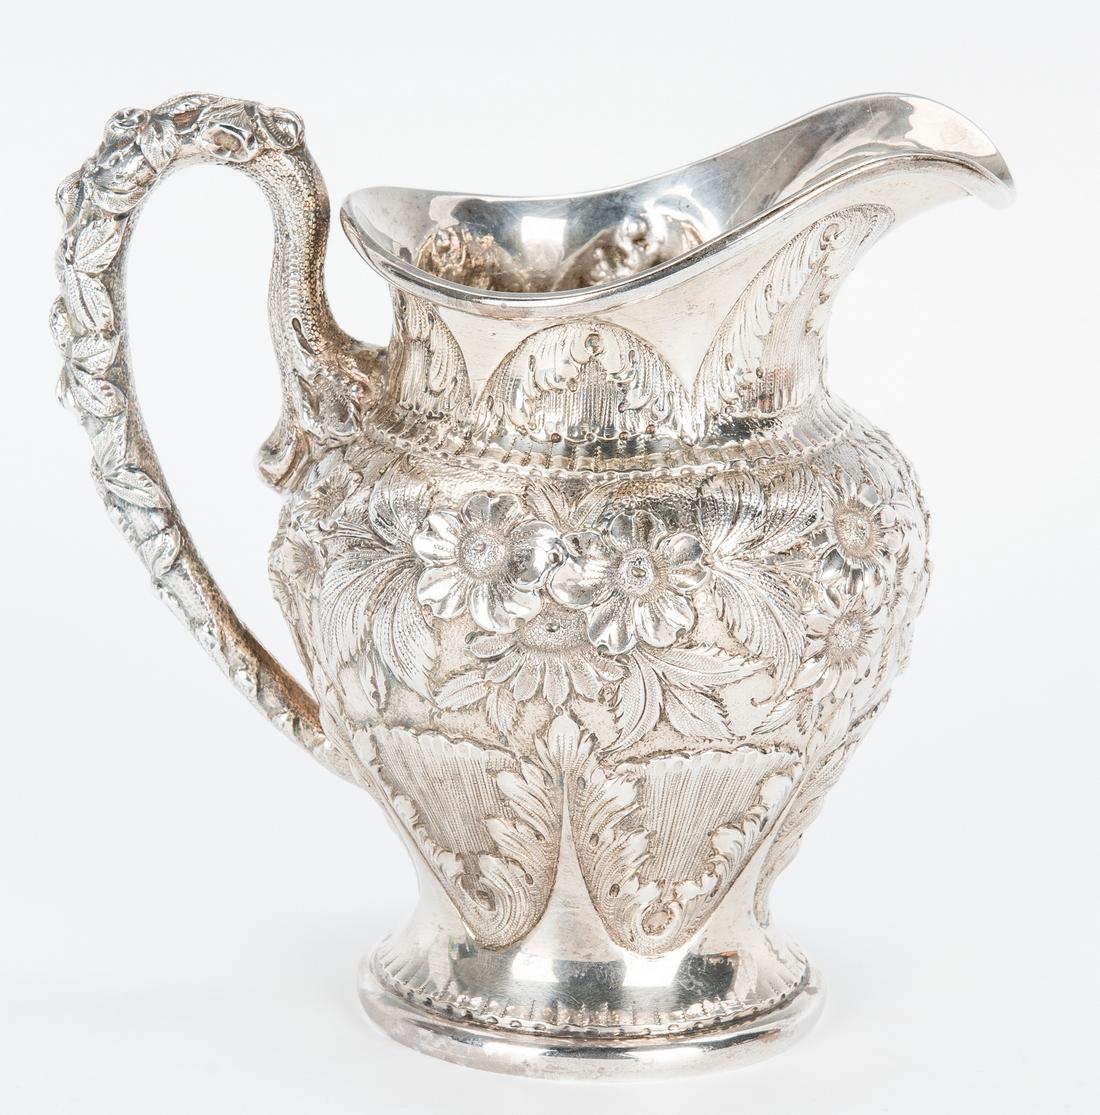 3 Pc. Kirk Repousse Silver Tea Set & more - Image 15 of 41